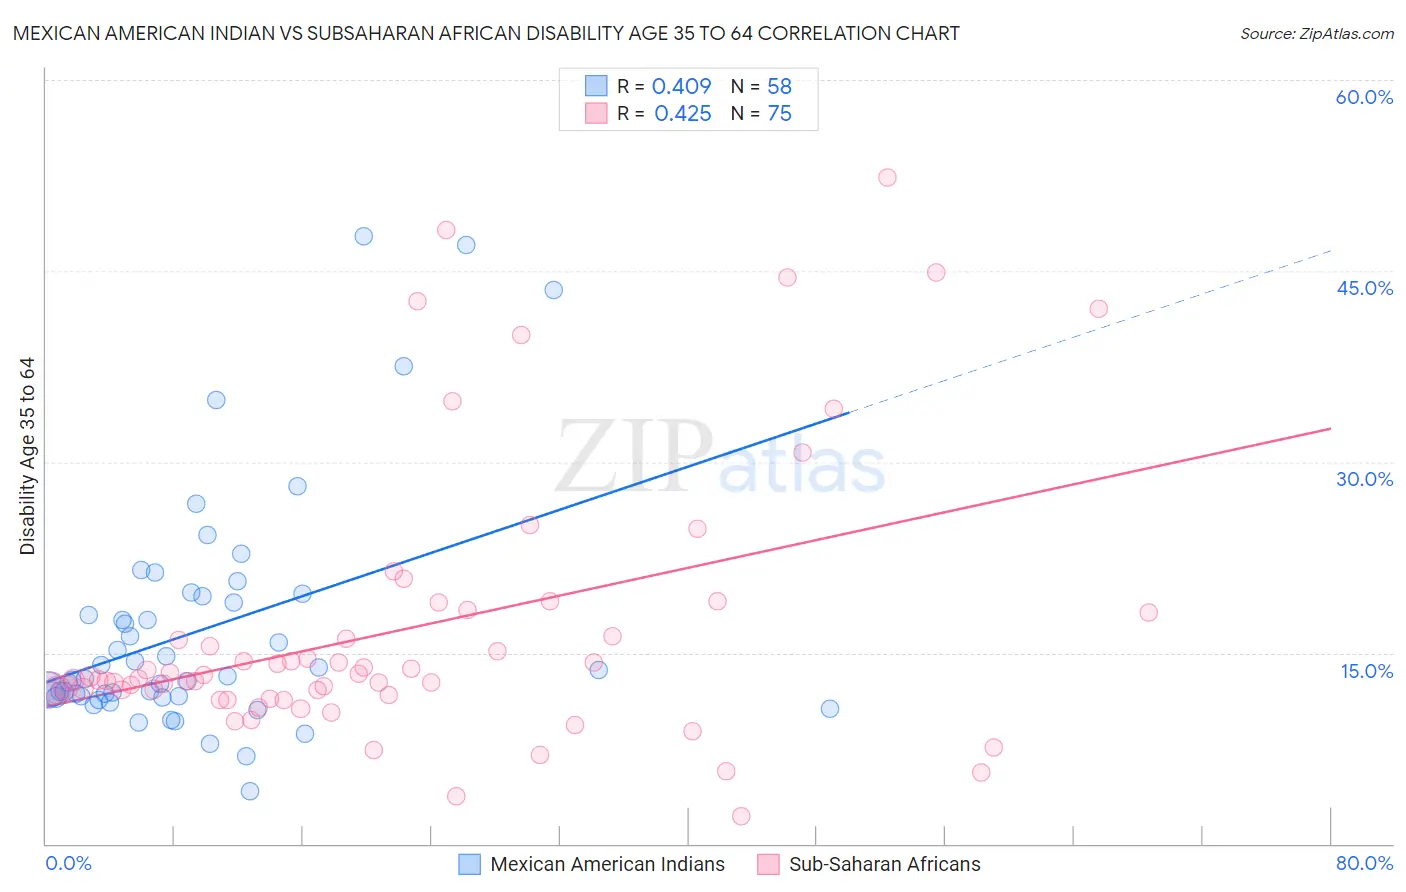 Mexican American Indian vs Subsaharan African Disability Age 35 to 64